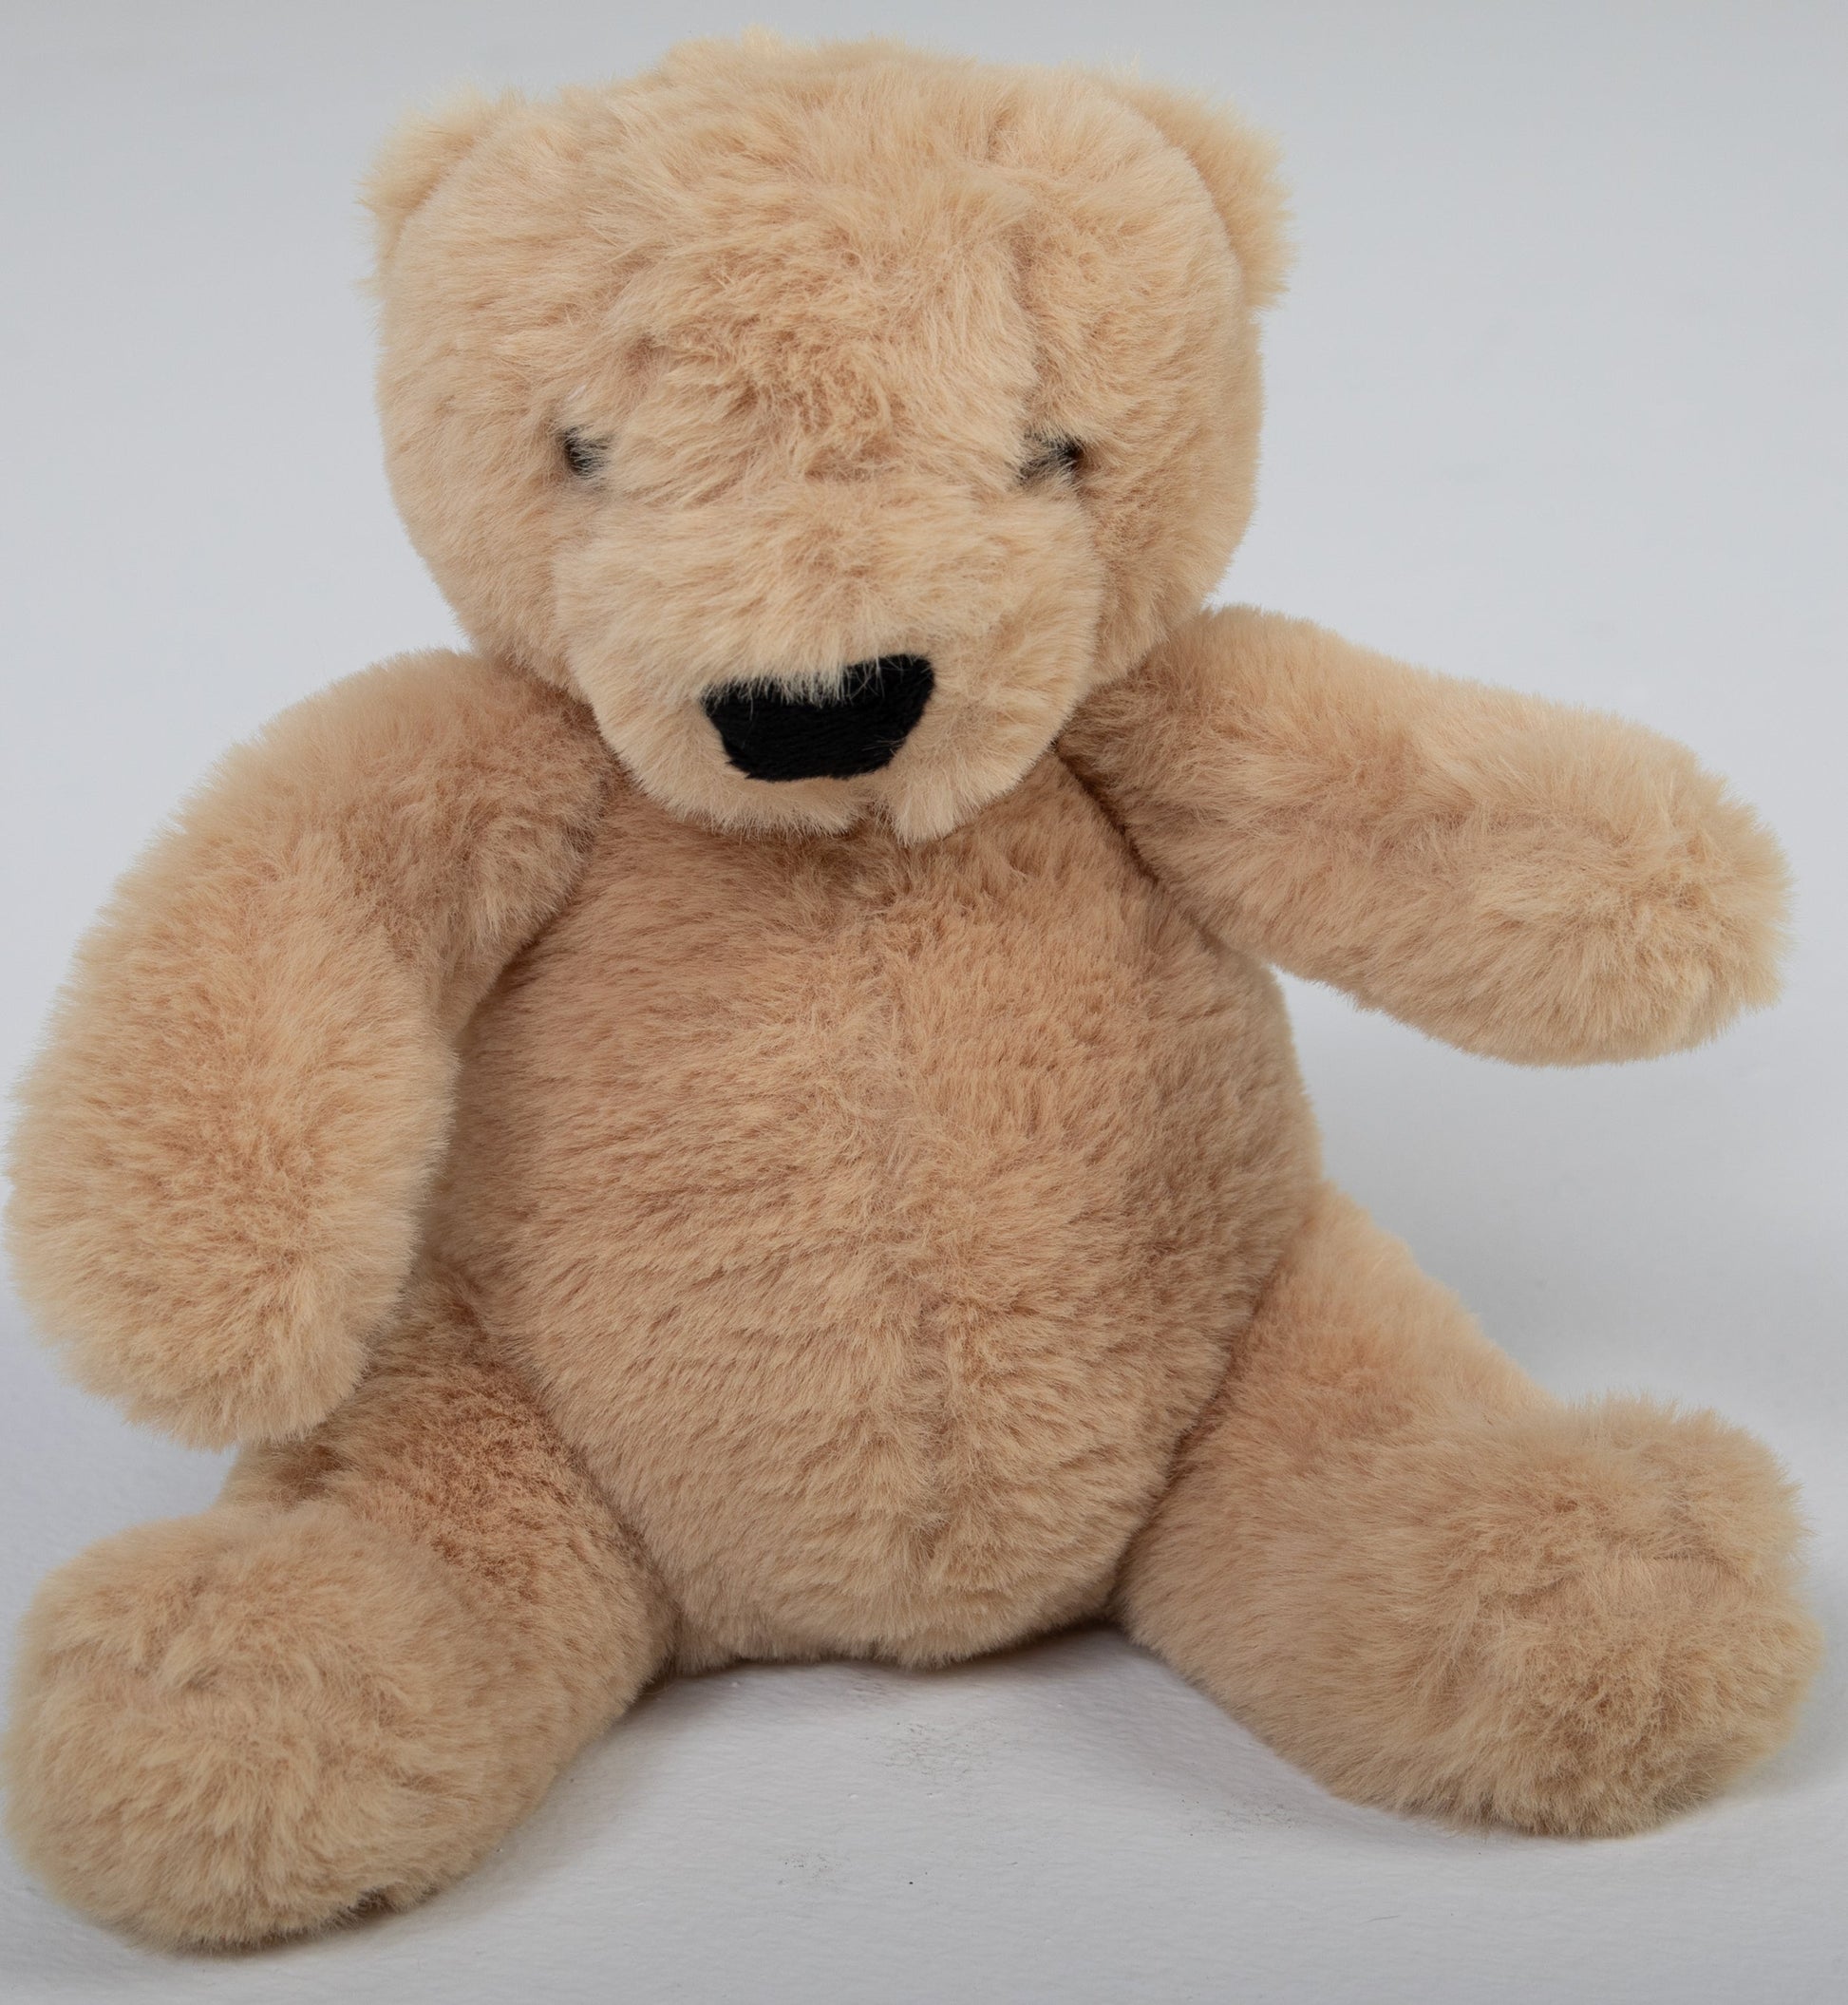 Every baby needs a cuddly companion, and our adorable stuffed teddy bear is here to provide comfort and companionship. Made with soft, child-safe materials, this plush toy is perfect for snuggling, playing, and sharing in your baby's earliest adventures.